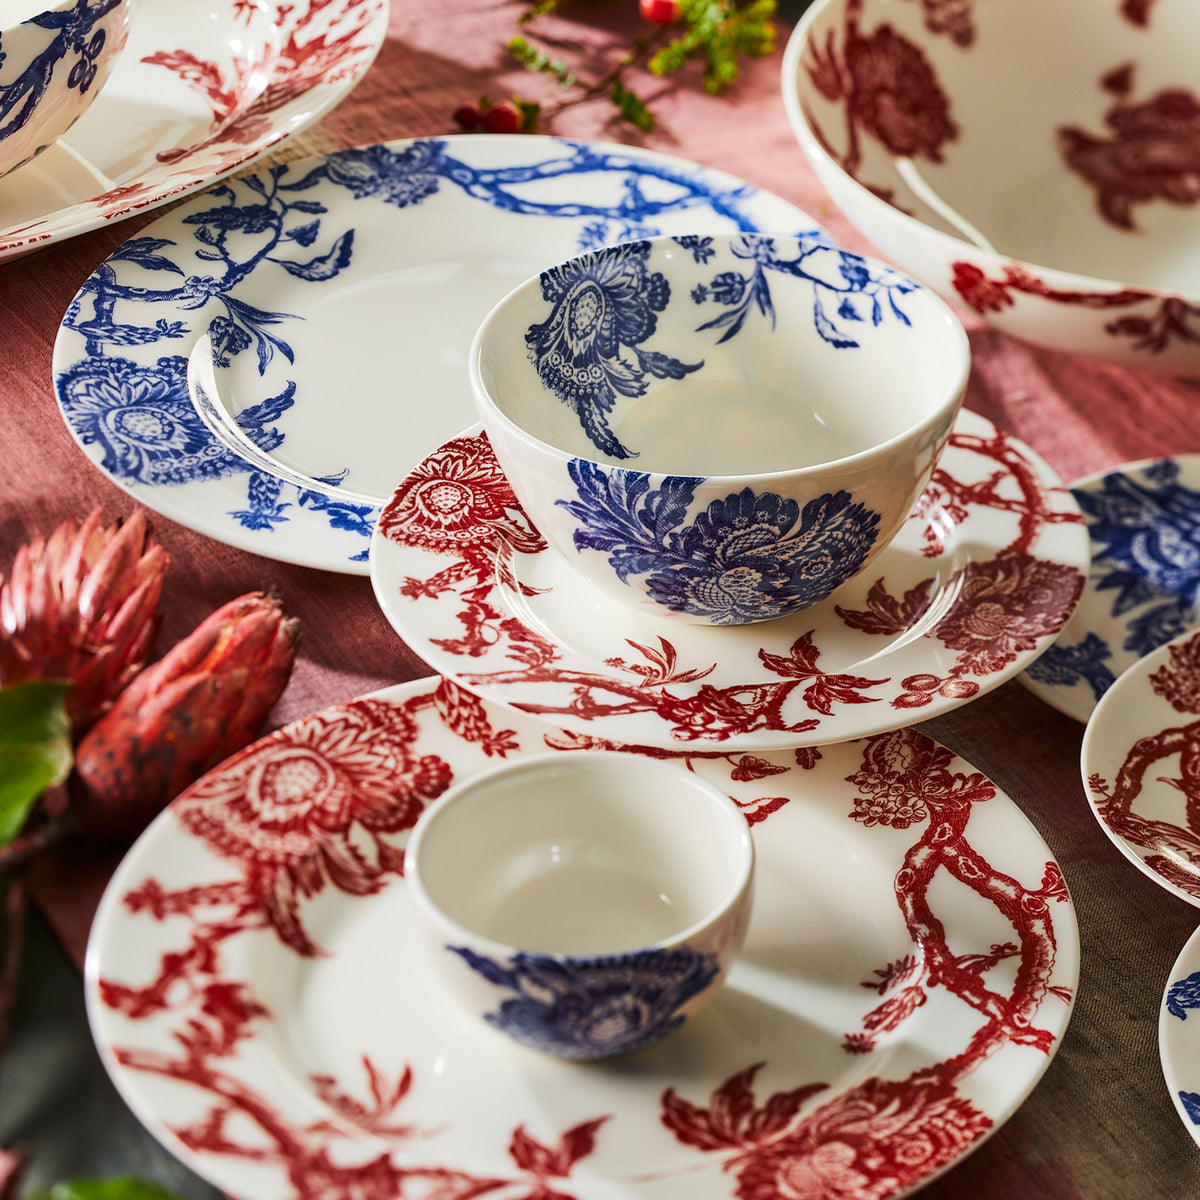 A collection of Caskata Arcadia Cereal Bowls featuring blue and red floral patterns, including plates, bowls, and cups, arranged on a pink surface with some greenery and flowers nearby.